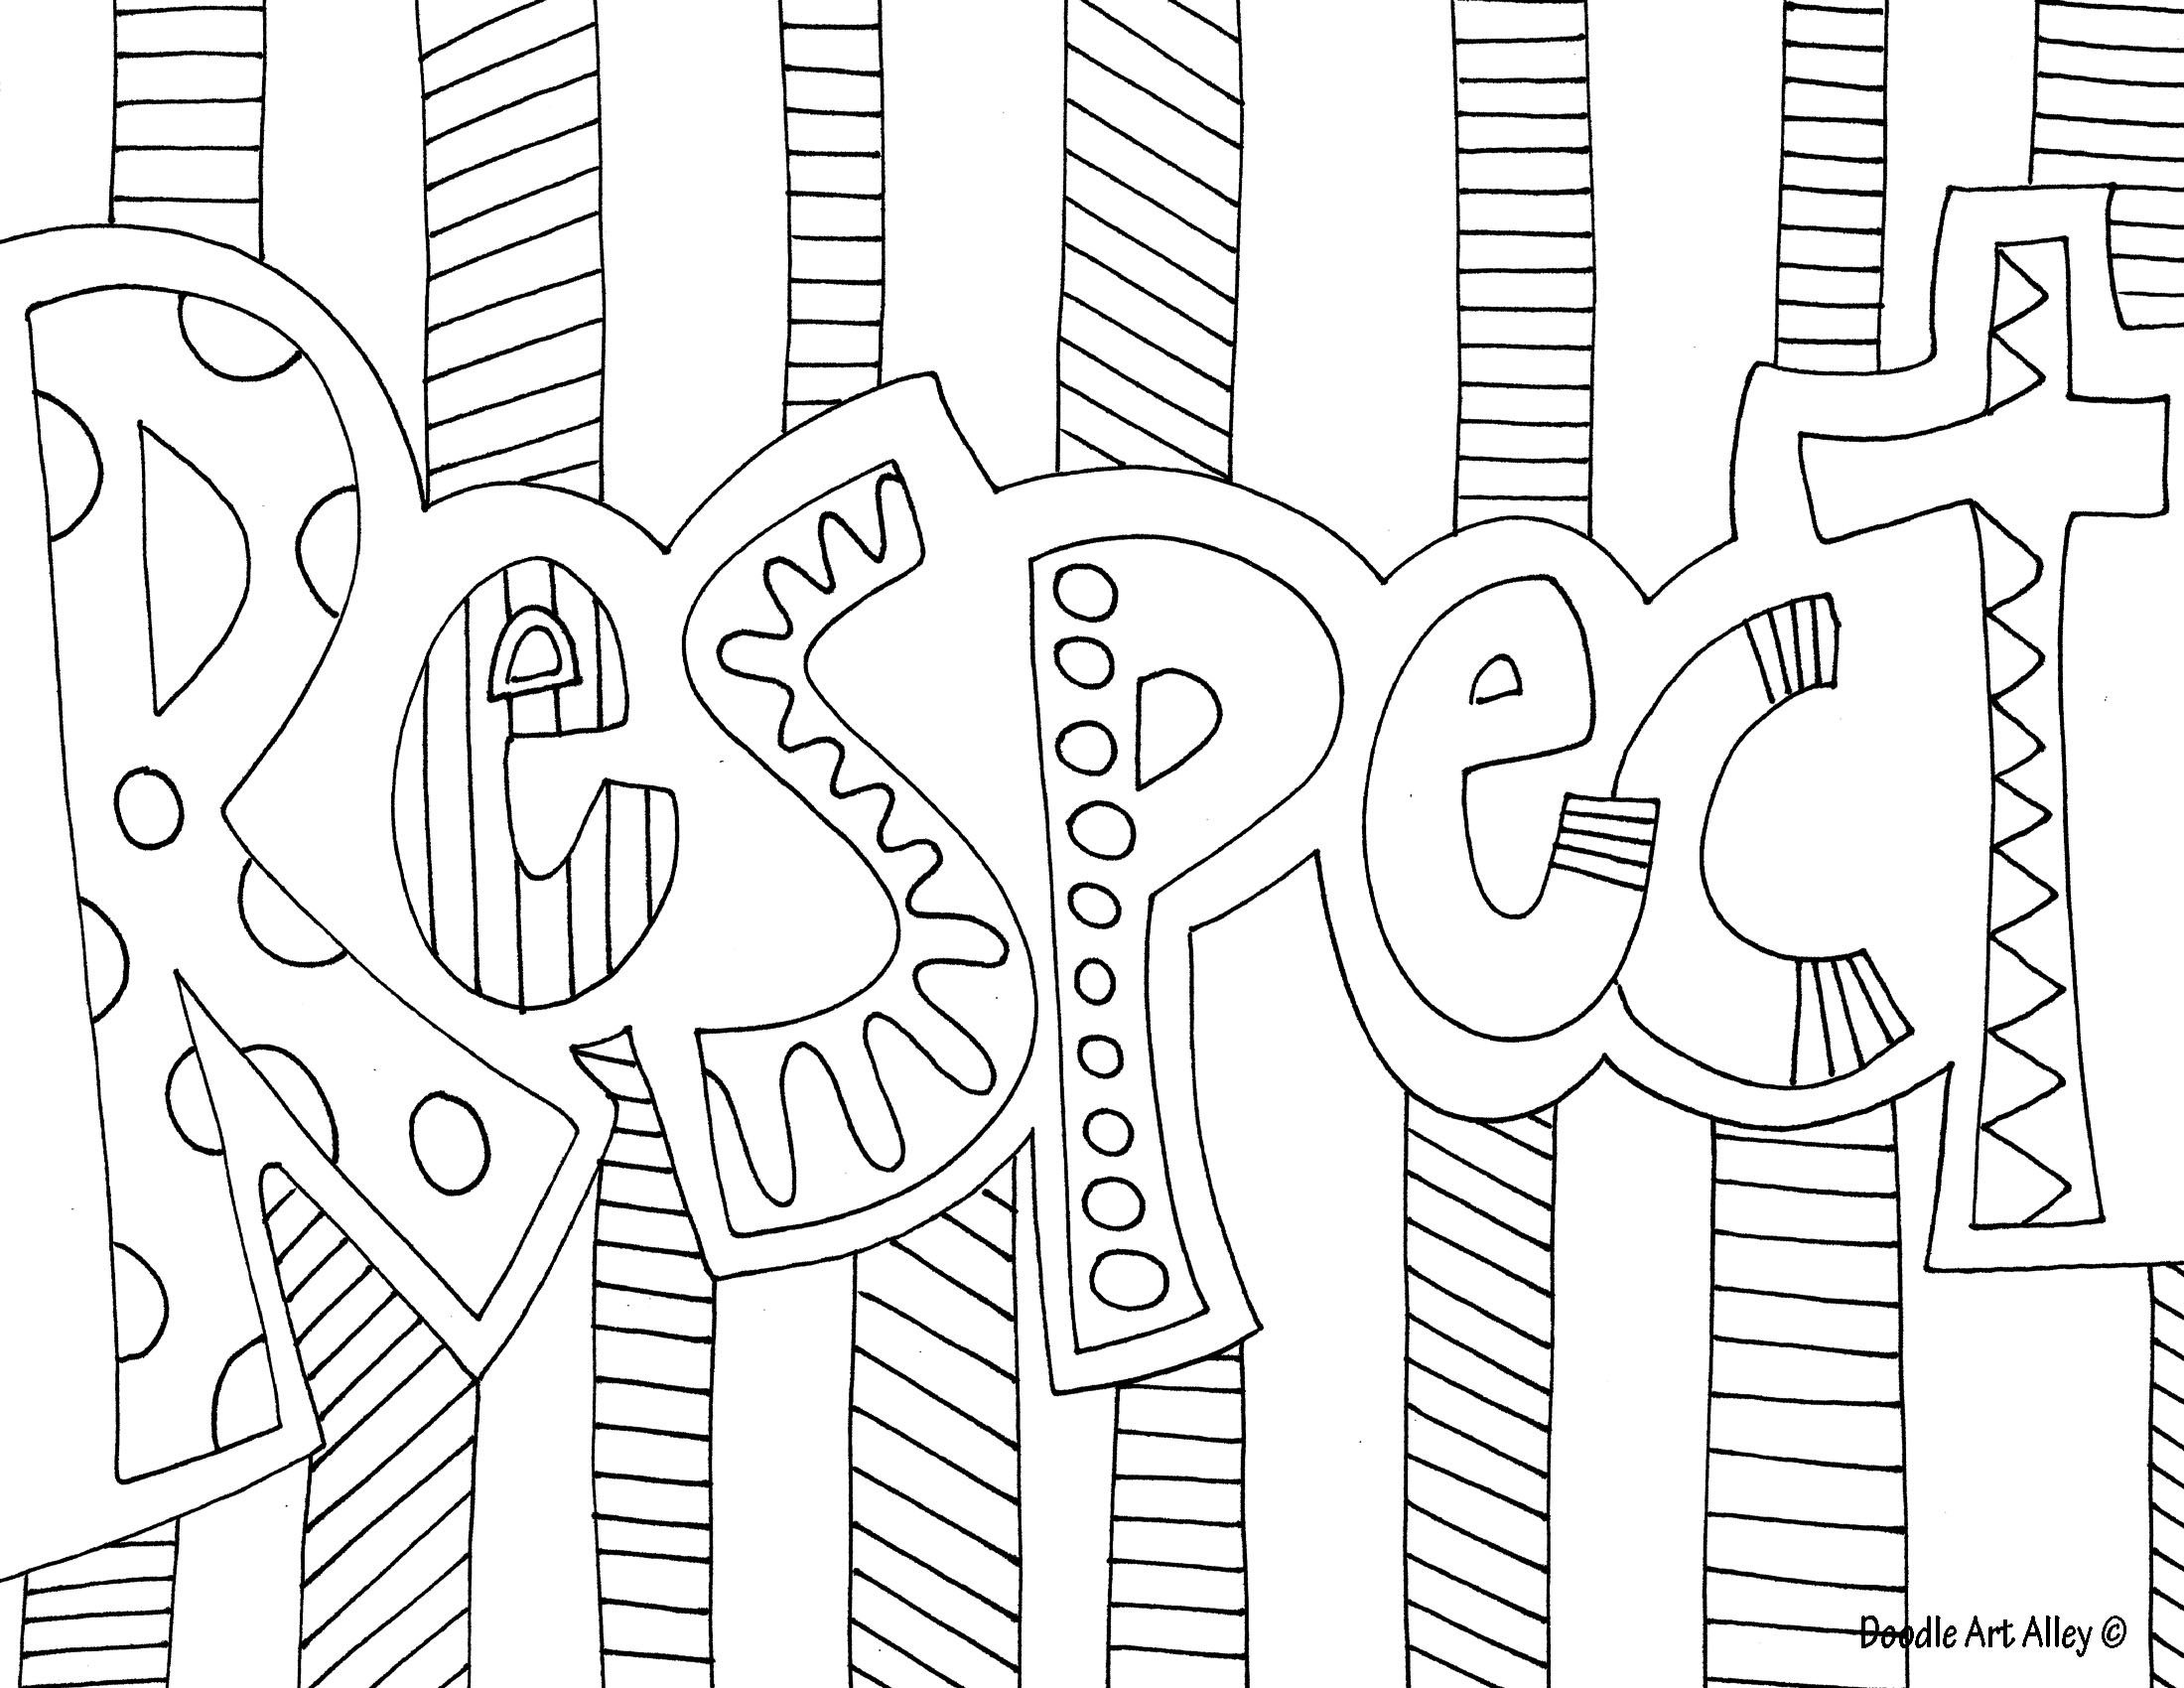 Pinbrittany Jones On Lettering | Doodle Art, Adult Coloring - Free Printable Coloring Pages On Respect